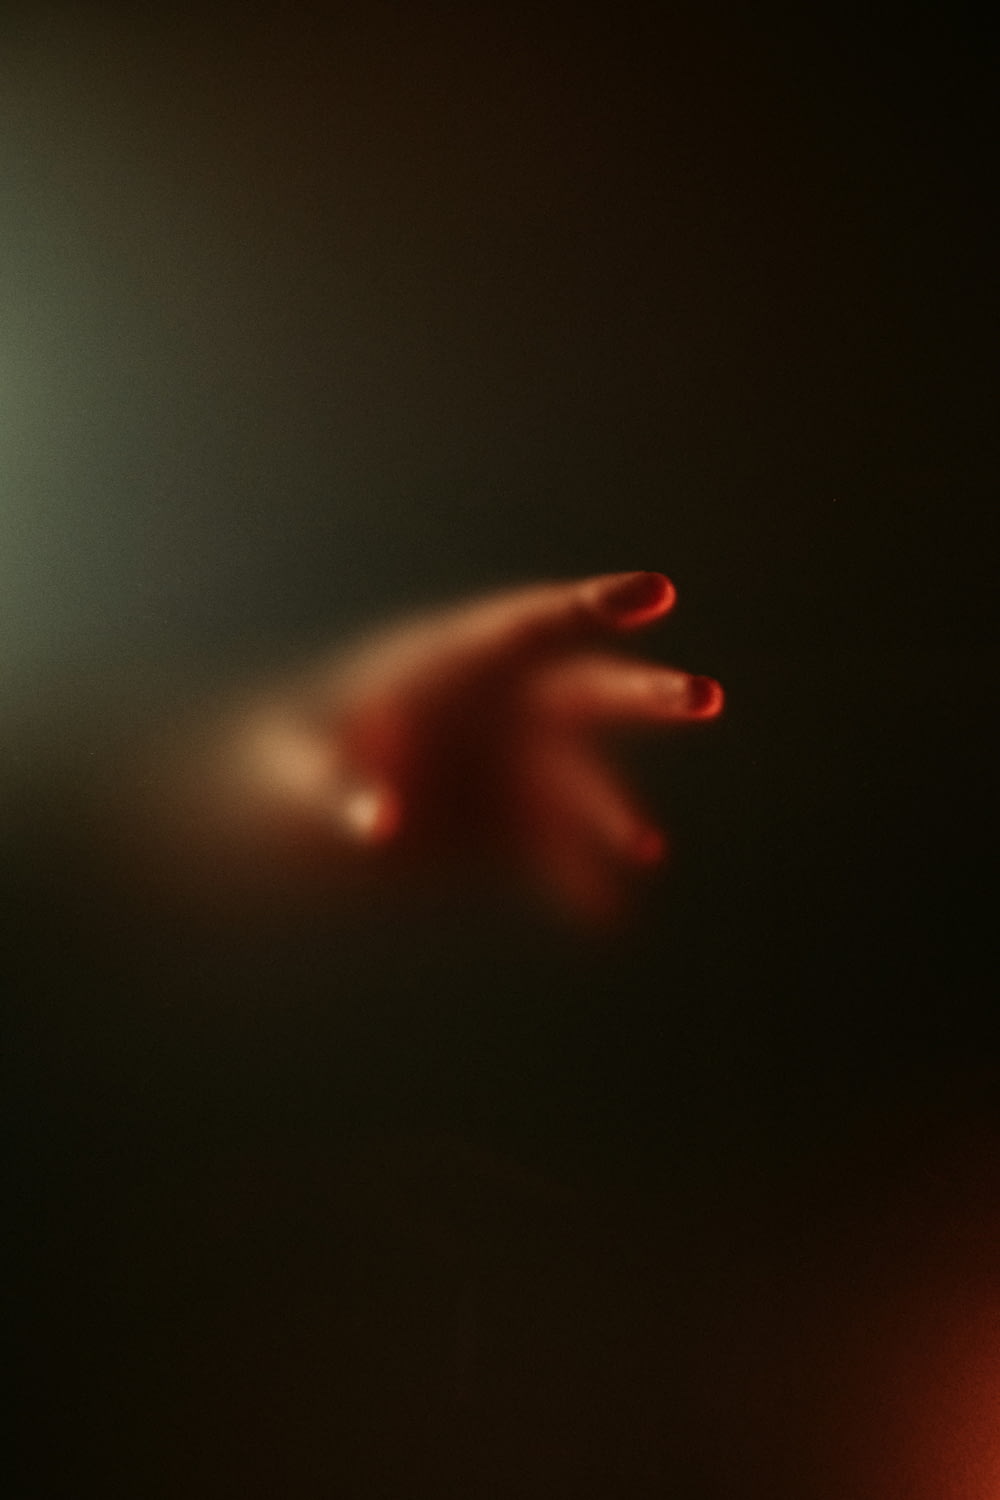 a blurry image of a person's hand with red nails